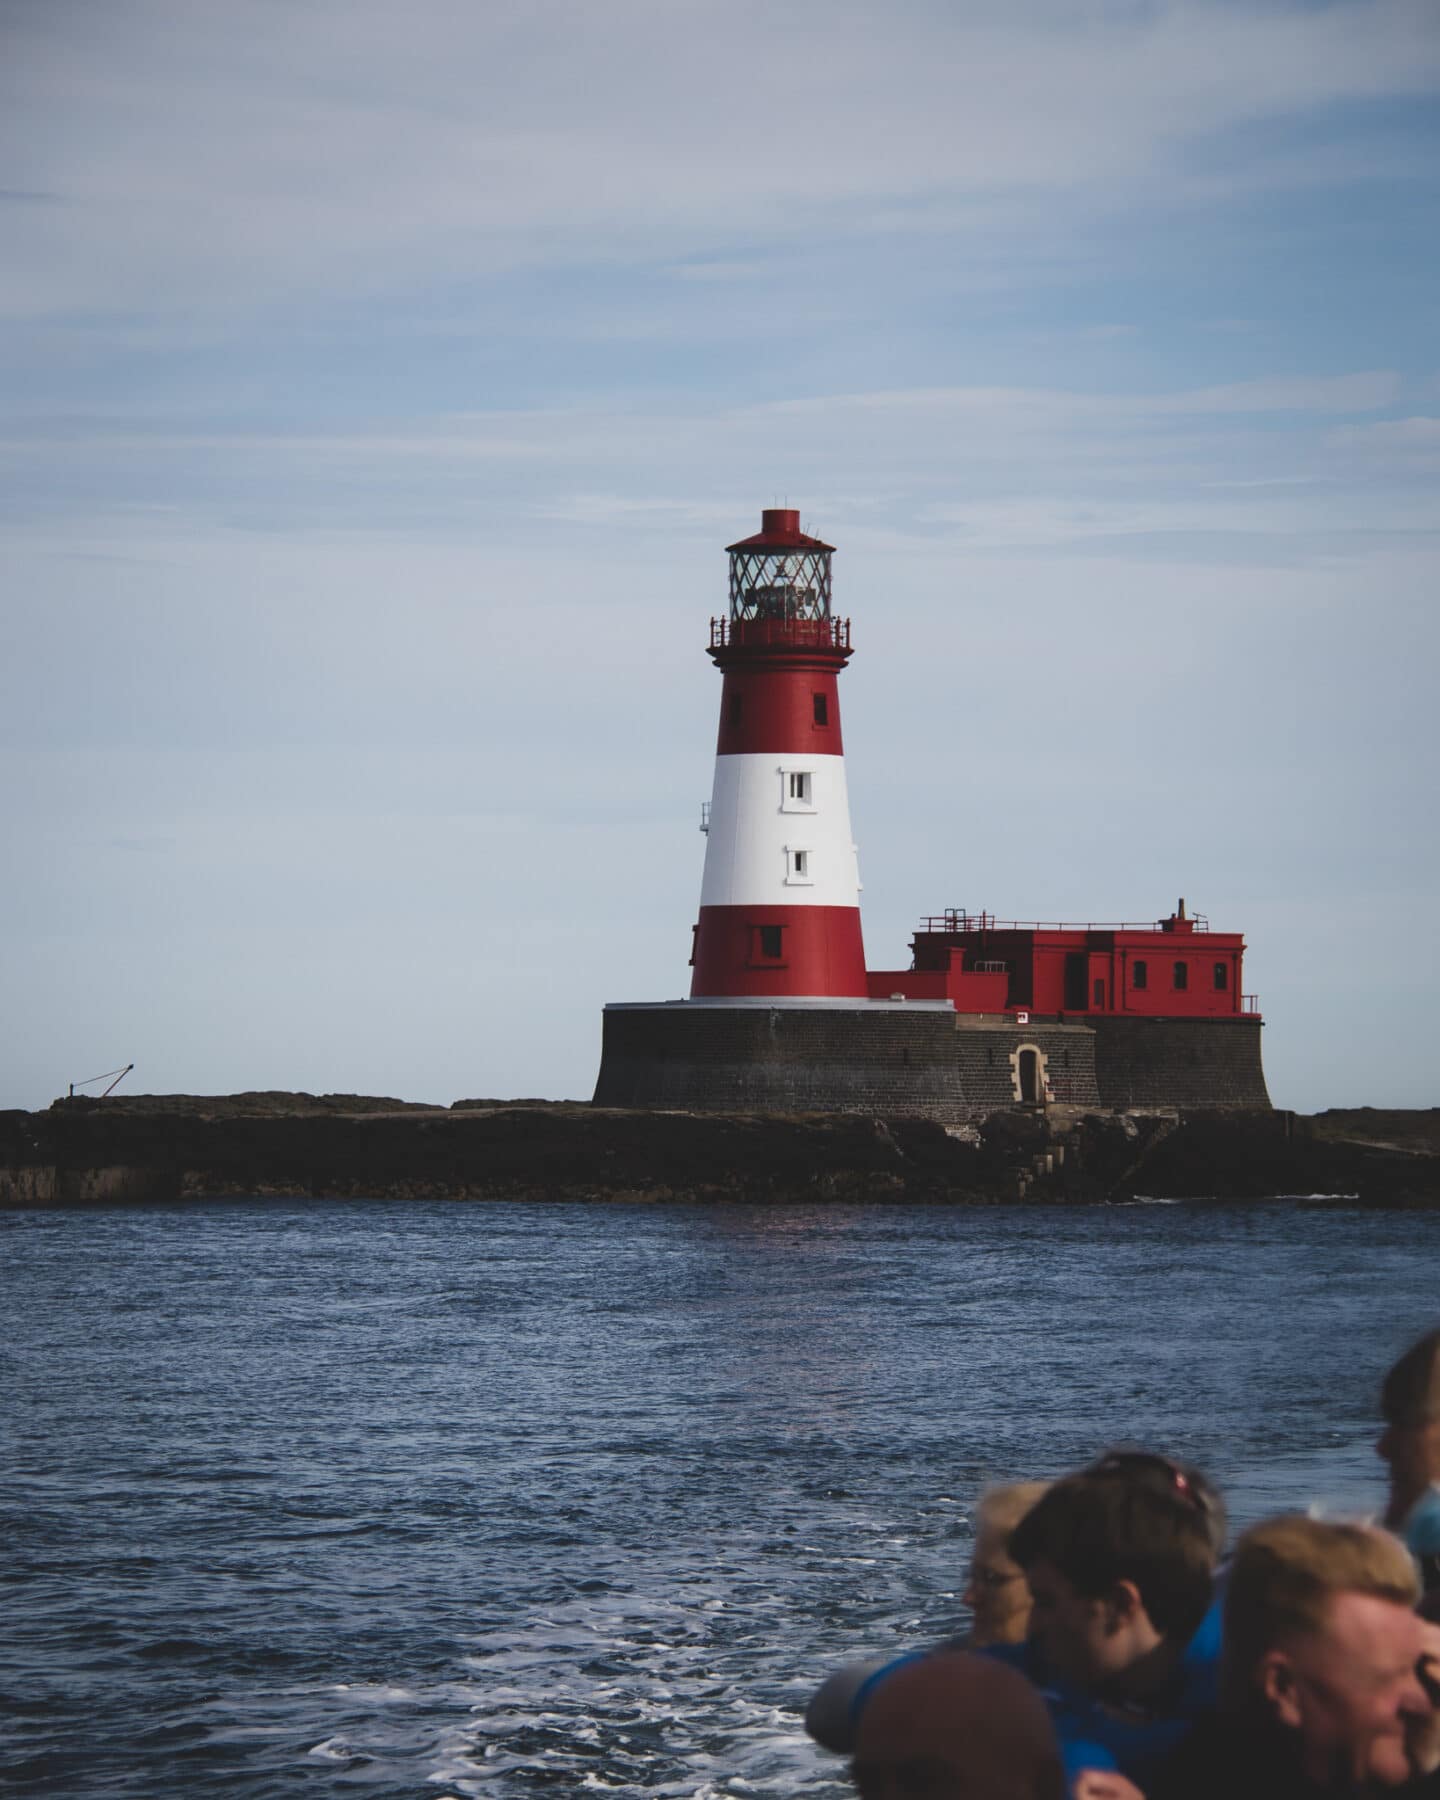 A view of Longstone Lighthouse from our boat. The lighthouse is red with a whitestripe around the middle. 